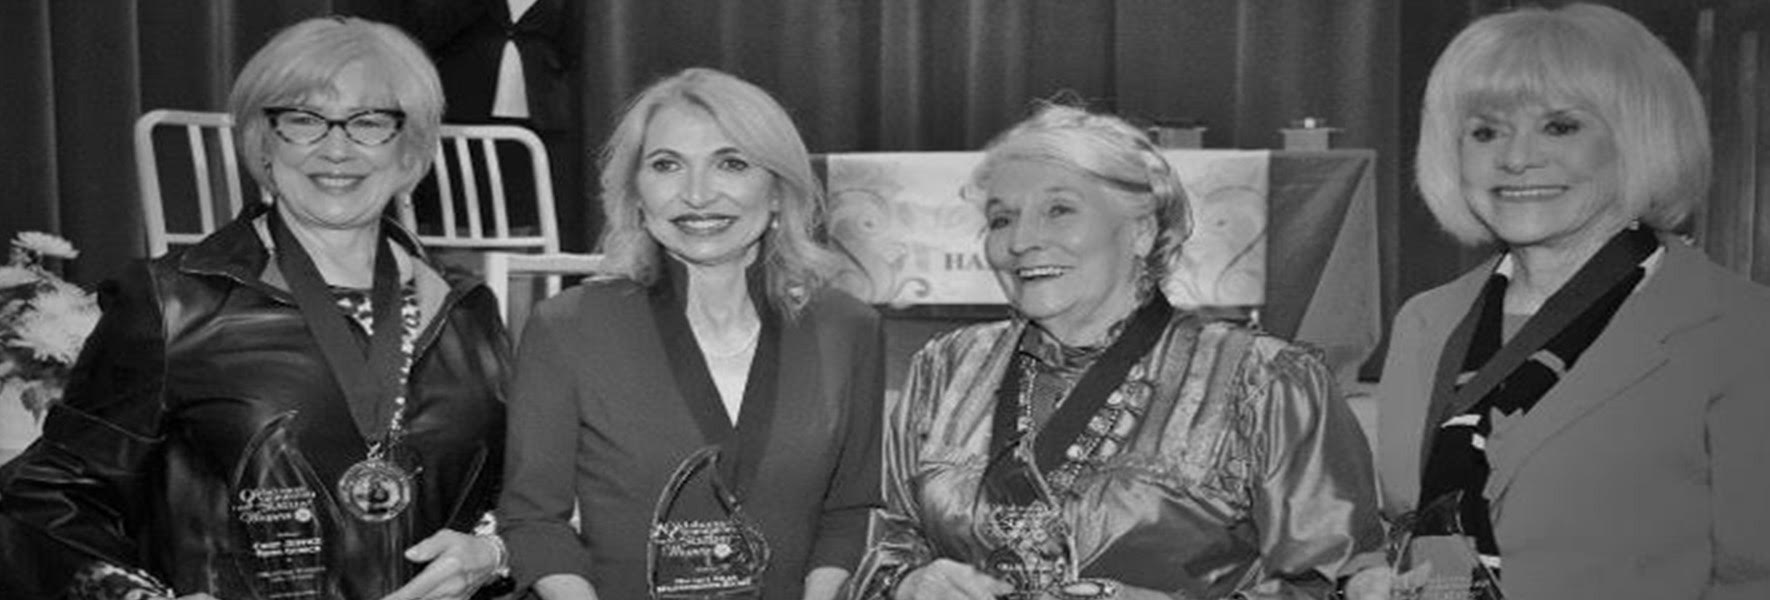 2019 Oklahoma Women's Hall of Fame inductees from left to right: Oklahoma Supreme Court Justice Noma Gurich, Andrea Holmes Volturo (accepting on behalf of Maj. Helen Holmes), Ollie Starr and Judy Love.